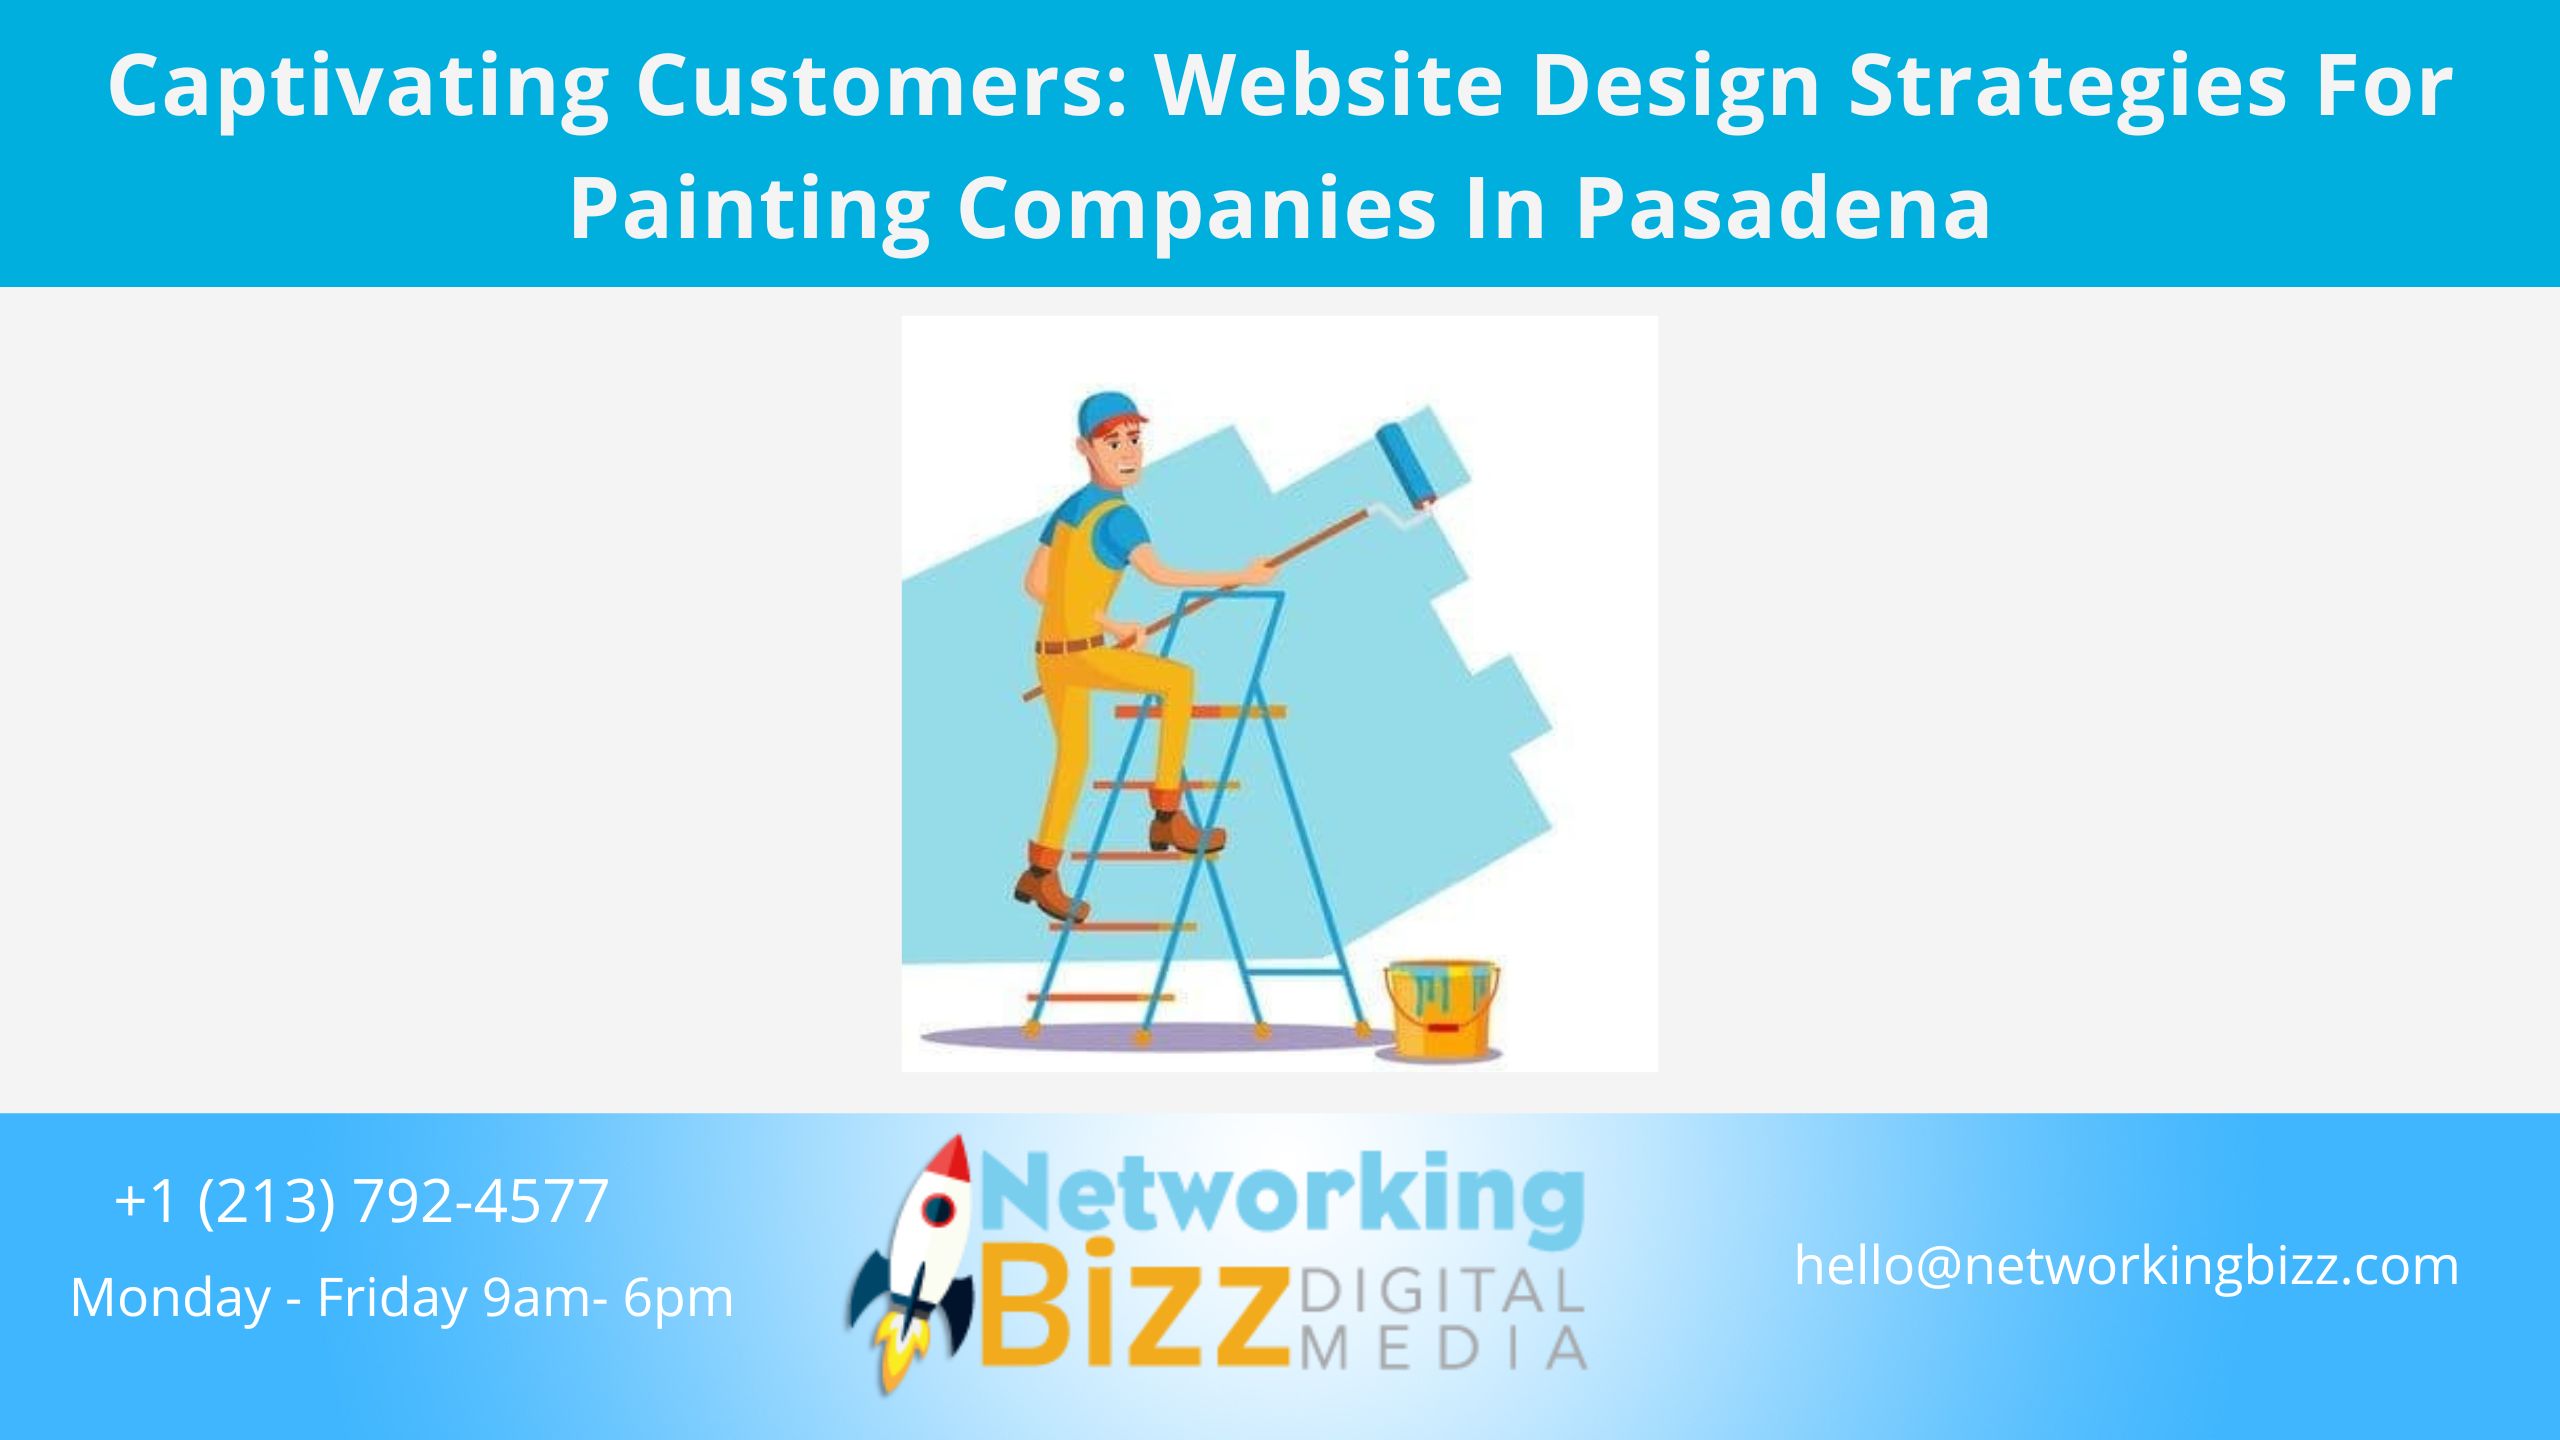 Captivating Customers: Website Design Strategies For Painting Companies In Pasadena